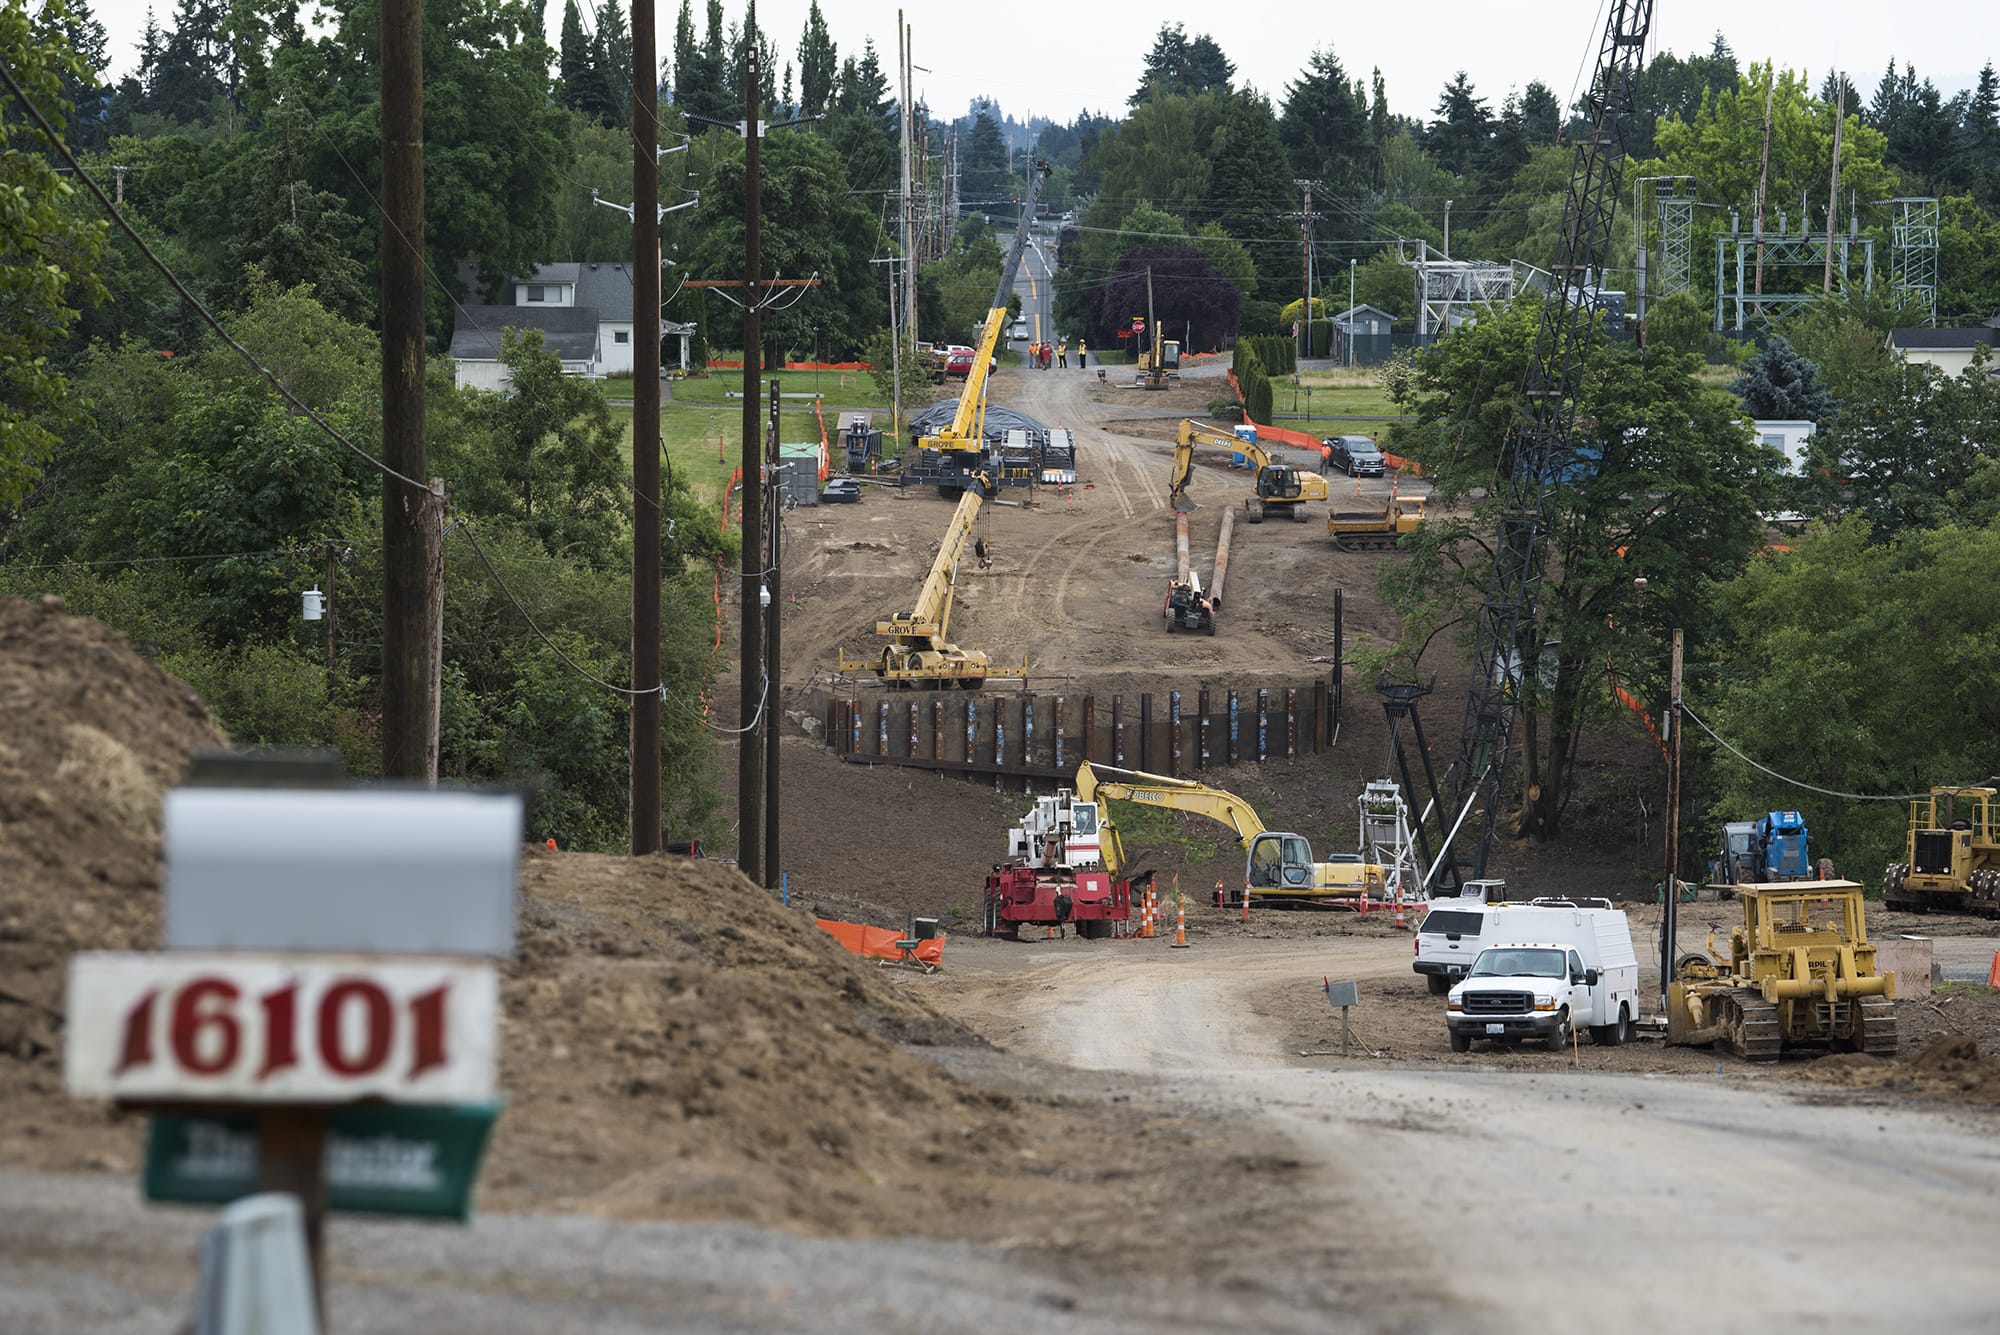 Labor & Industries has issued fines against Vancouver-based Colf Construction for its work on the project to build a bridge over Whipple Creek just south of the Clark County Fairgrounds.